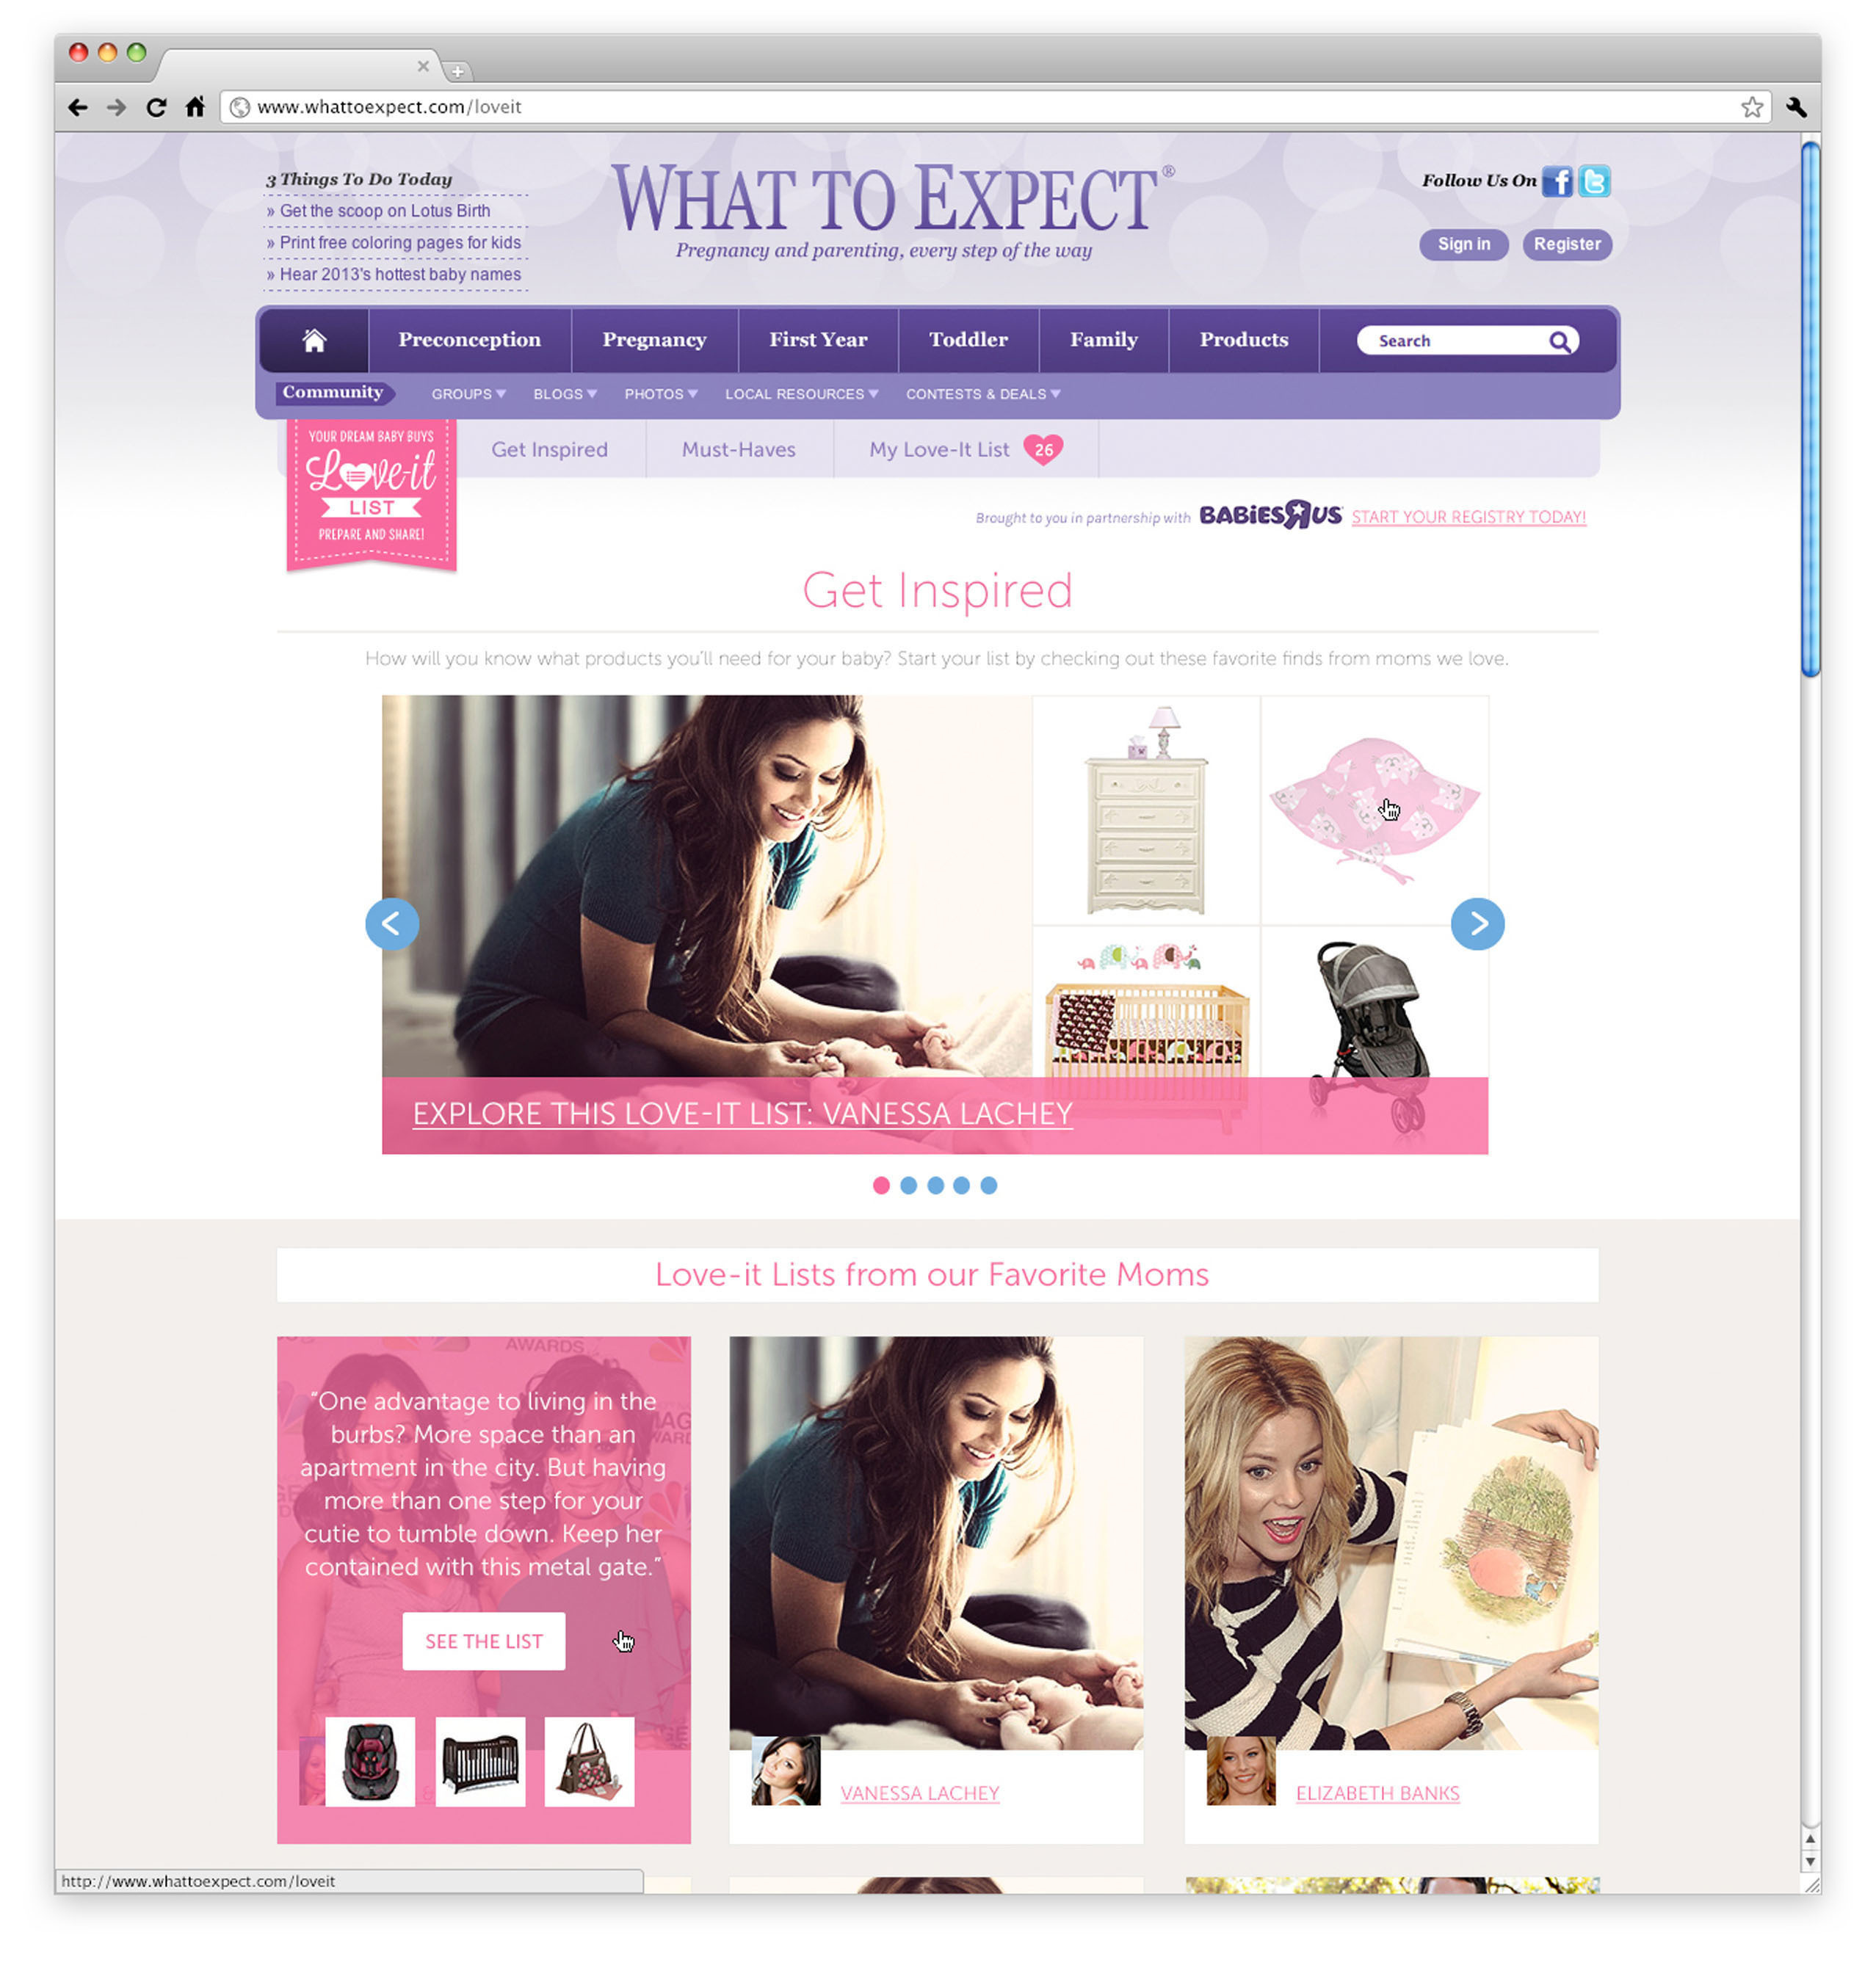 WhatToExpect.com and Babies"R"Us Launch "Love-it Lists" To Help Expectant Parents Create a Dream Baby Registry. (PRNewsFoto/Everyday Health, Inc.) (PRNewsFoto/EVERYDAY HEALTH, INC.)